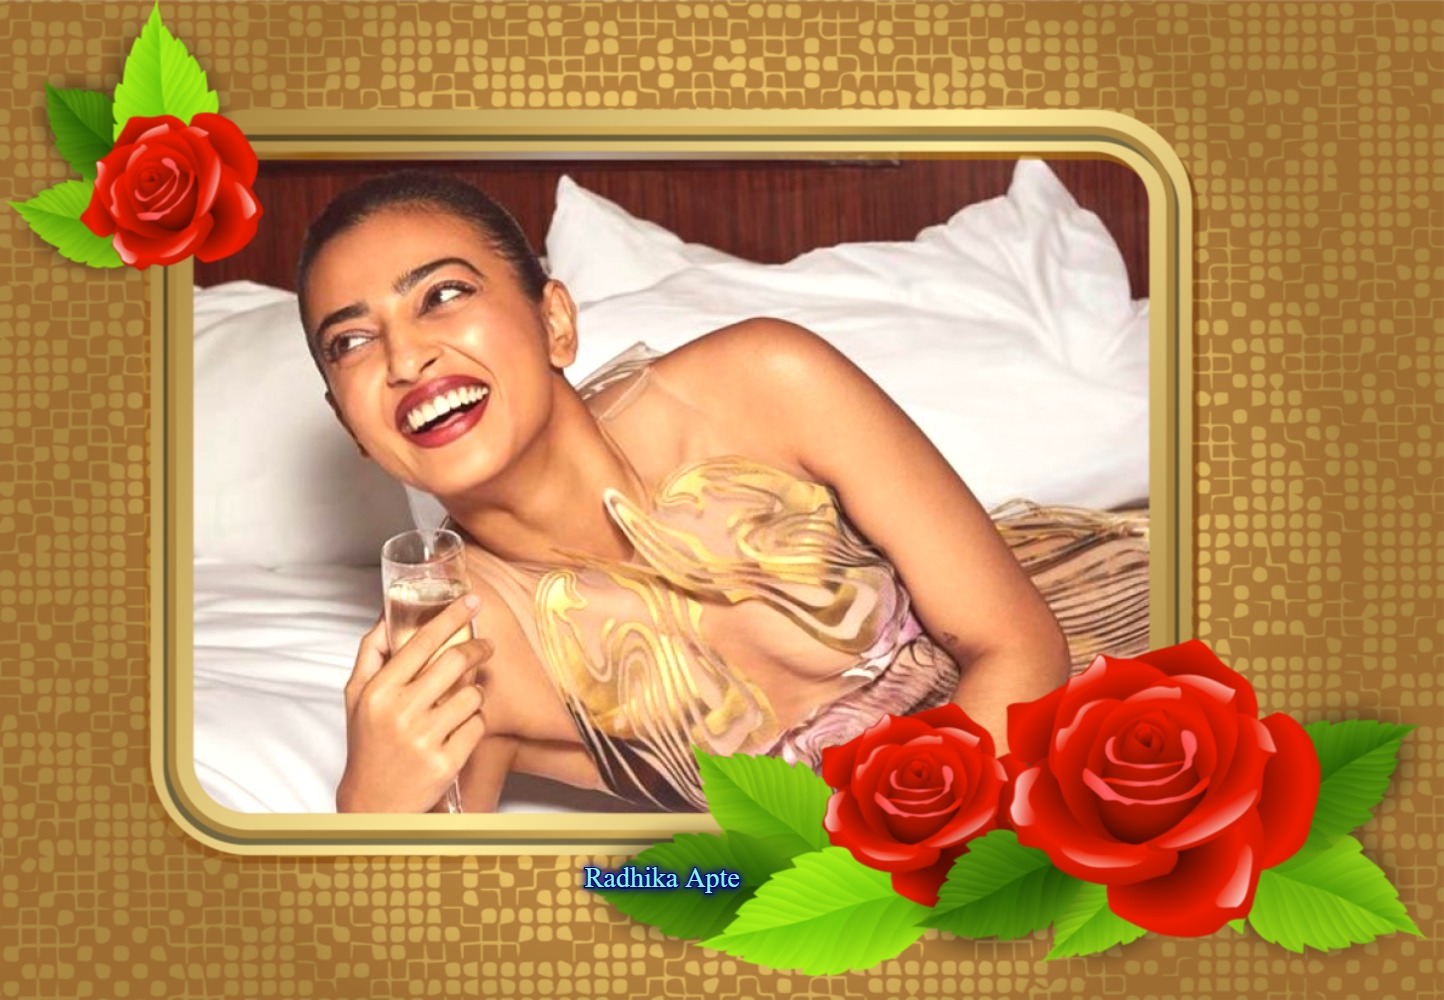 Read more about the article “Elegance Personified Talented Actress-Radhika Apte”